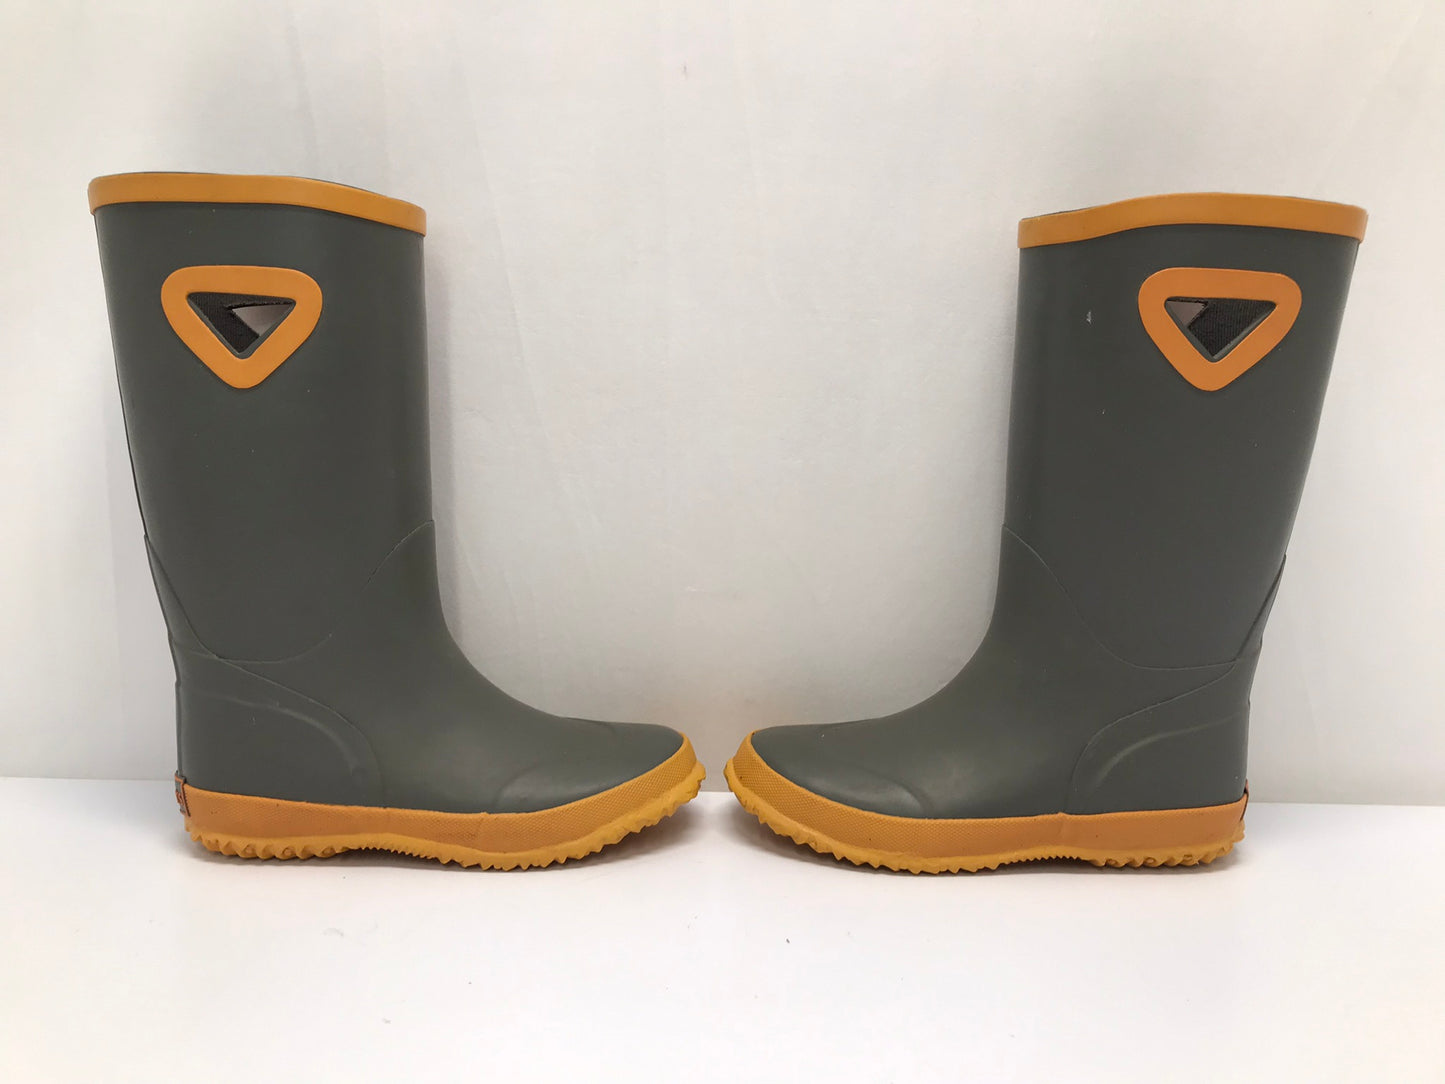 Rain Boots Child Size 1 Elements Rubber Grey and Yellow As New